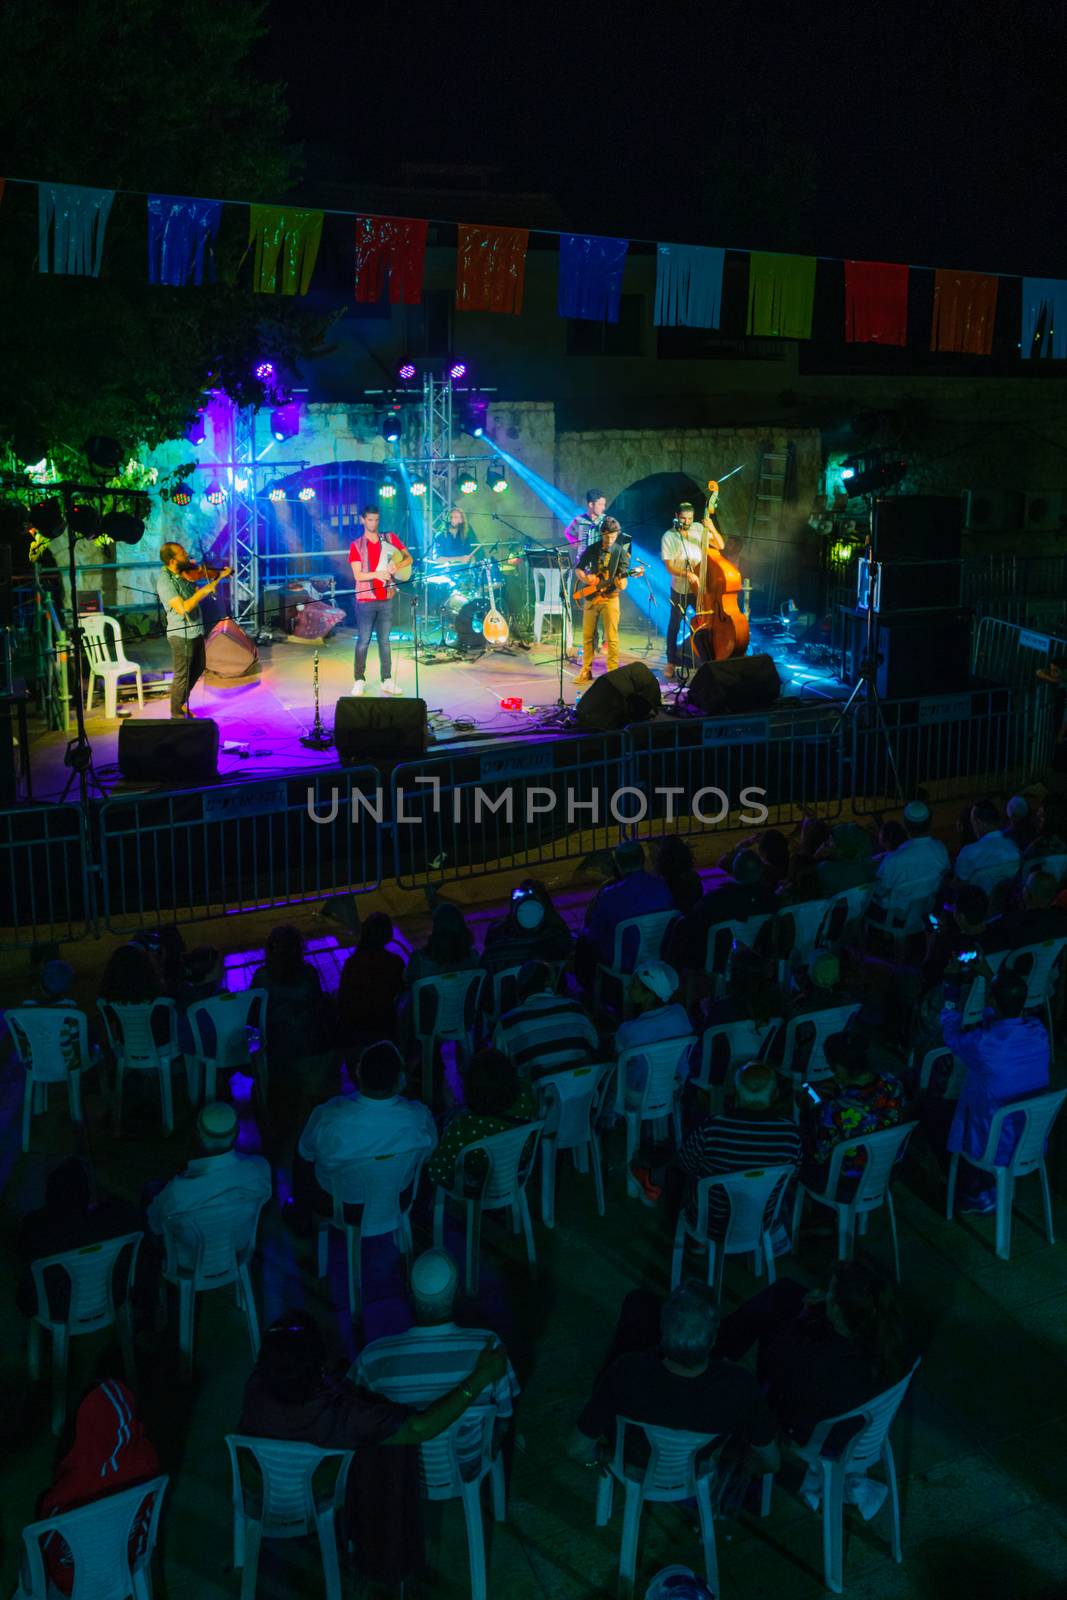 SAFED, ISRAEL - AUG 23, 2017: Group of musicians (Gute Gute) and crowd at the Klezmer Festival in Safed (Tzfat), Israel. Its the 30th annual traditional Jewish festival in the public streets of Safed